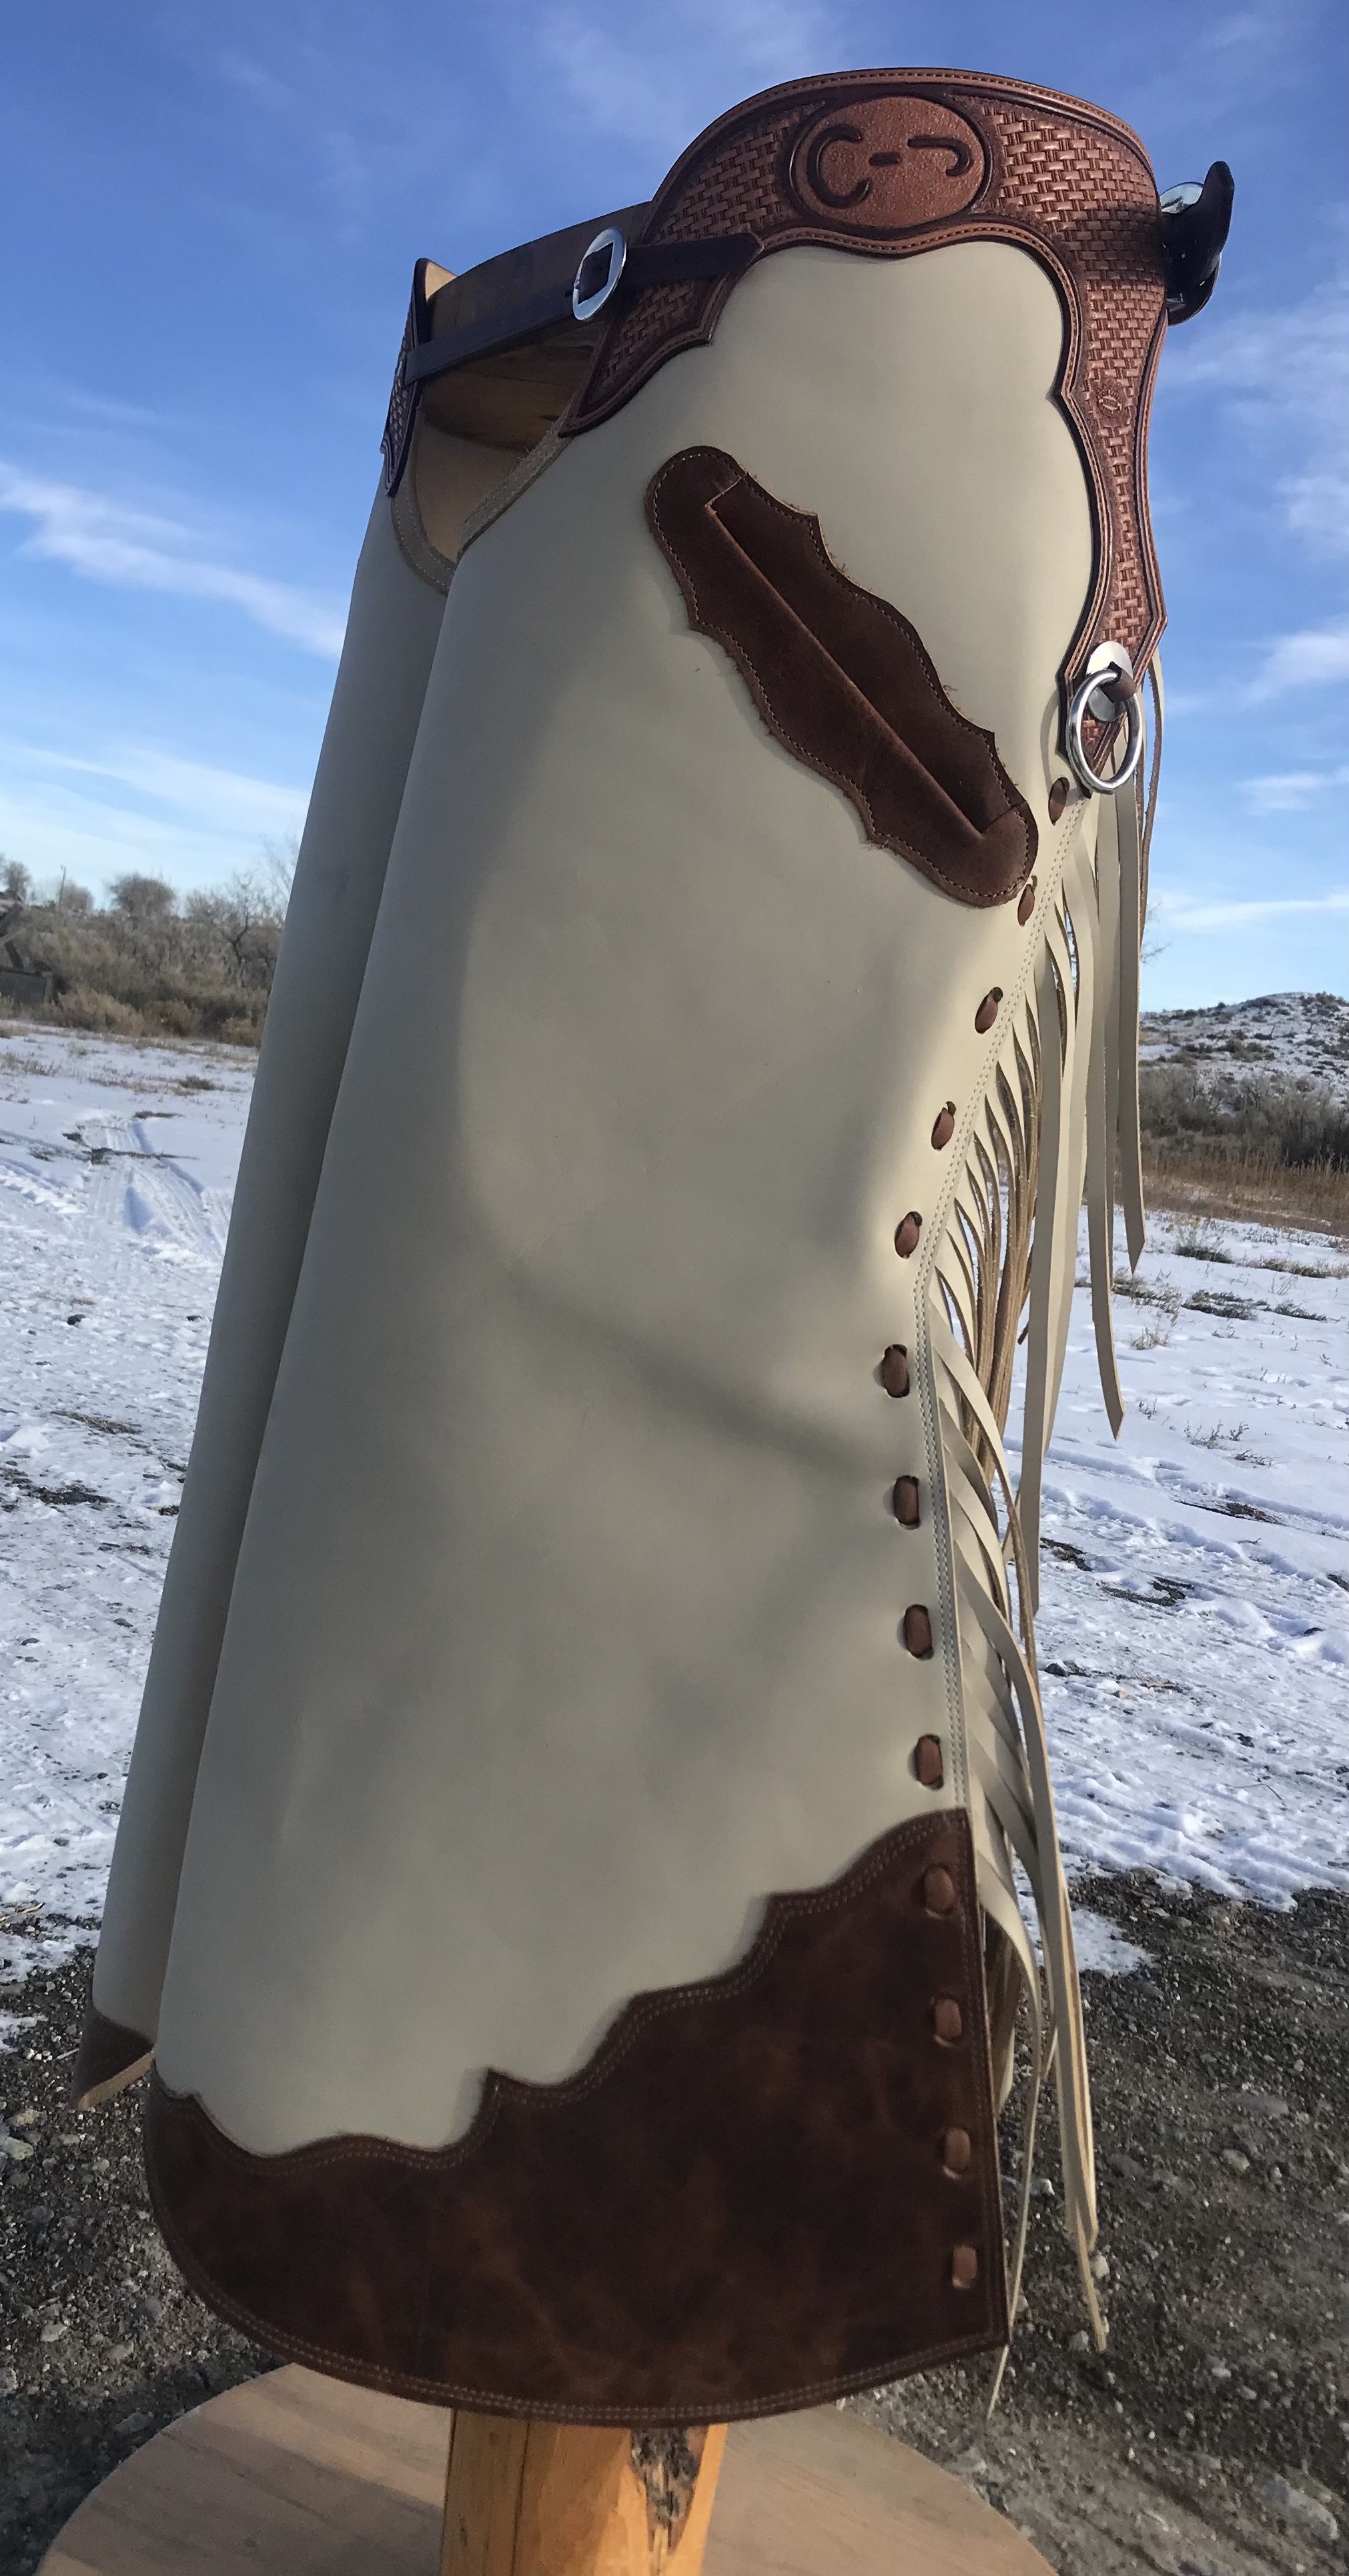 Chaps made at Cow Camp Saddlery. Photo courtesy Mark Barcus.